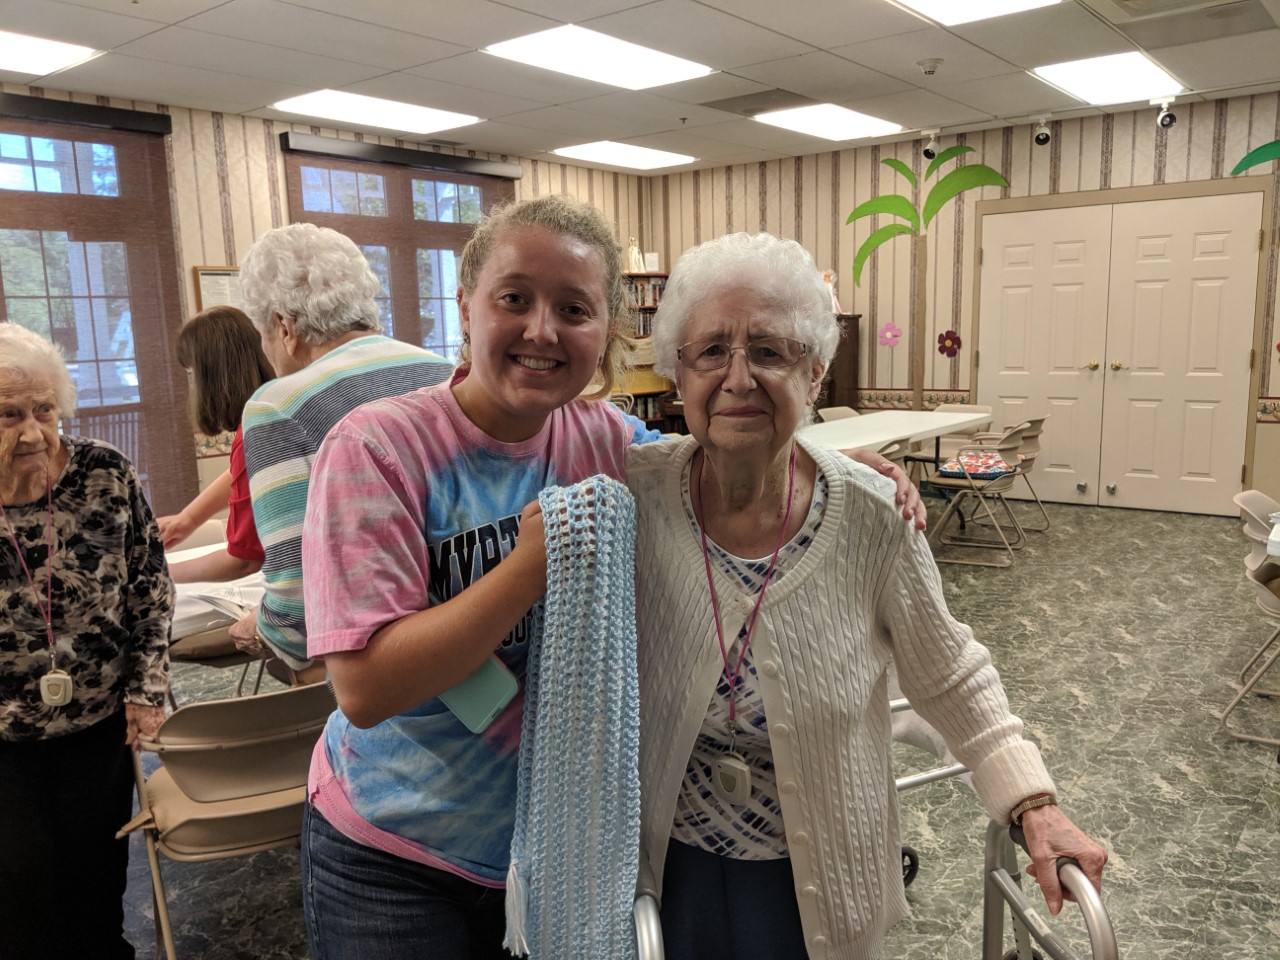 First-year Honors College student Shelby Slomers is pictured with Mary Mariano, a resident at Mercy Health Marian Assisted Living Center in North Lima. Mariano makes scarves in memory of her son who died at age 22. She gave Slomers the scarf as a gift after spending the morning making greeting cards together and sharing in conversation.